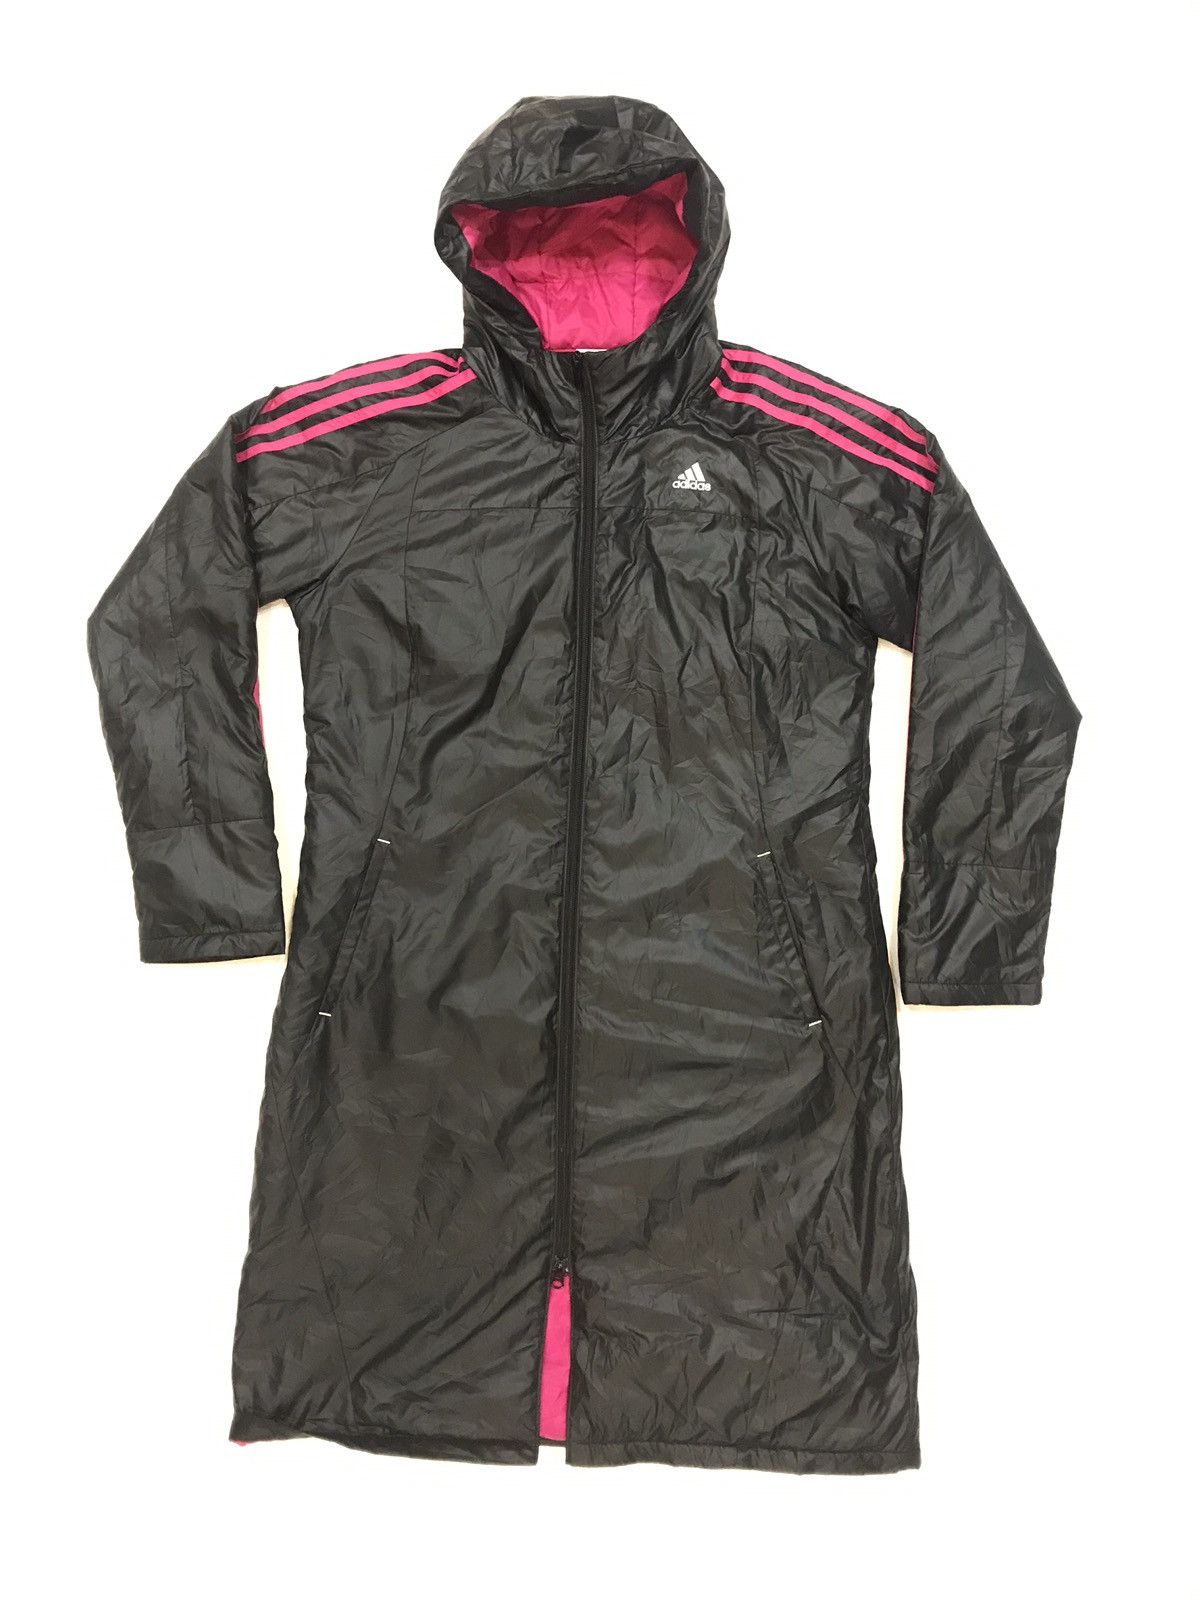 Adidas ADIDAS 3 STRIPES LONG PUFFER JACKET PARKA HOODED Size US S / EU 44-46 / 1 - 1 Preview